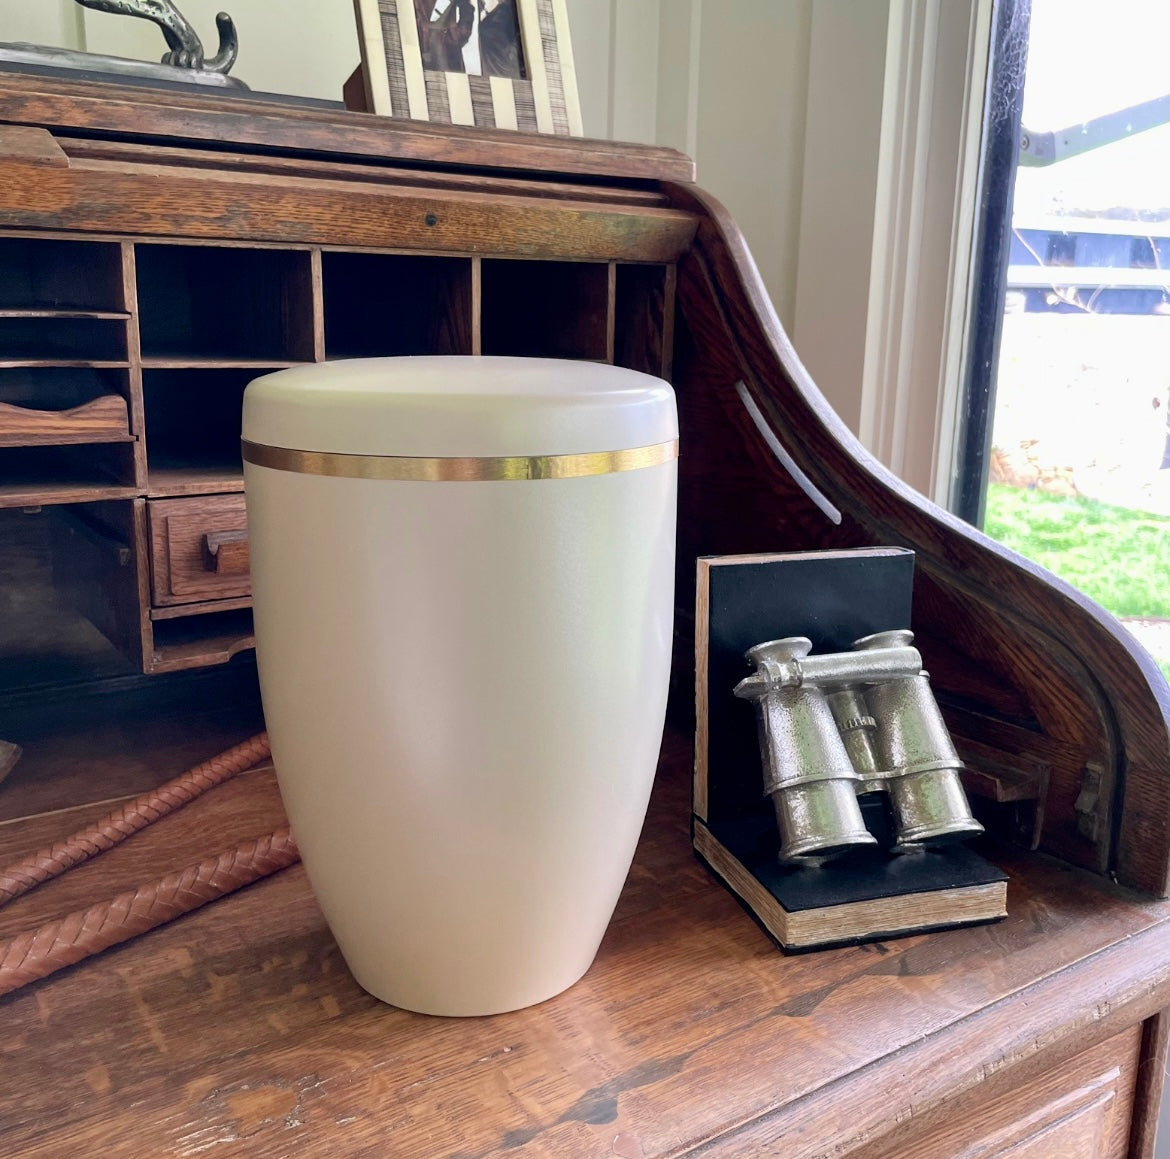 Beautiful cream coloured urn for ashes with a slightly pearlised sheen and a brushed golden band. The urn sits on an antique wooden desk.